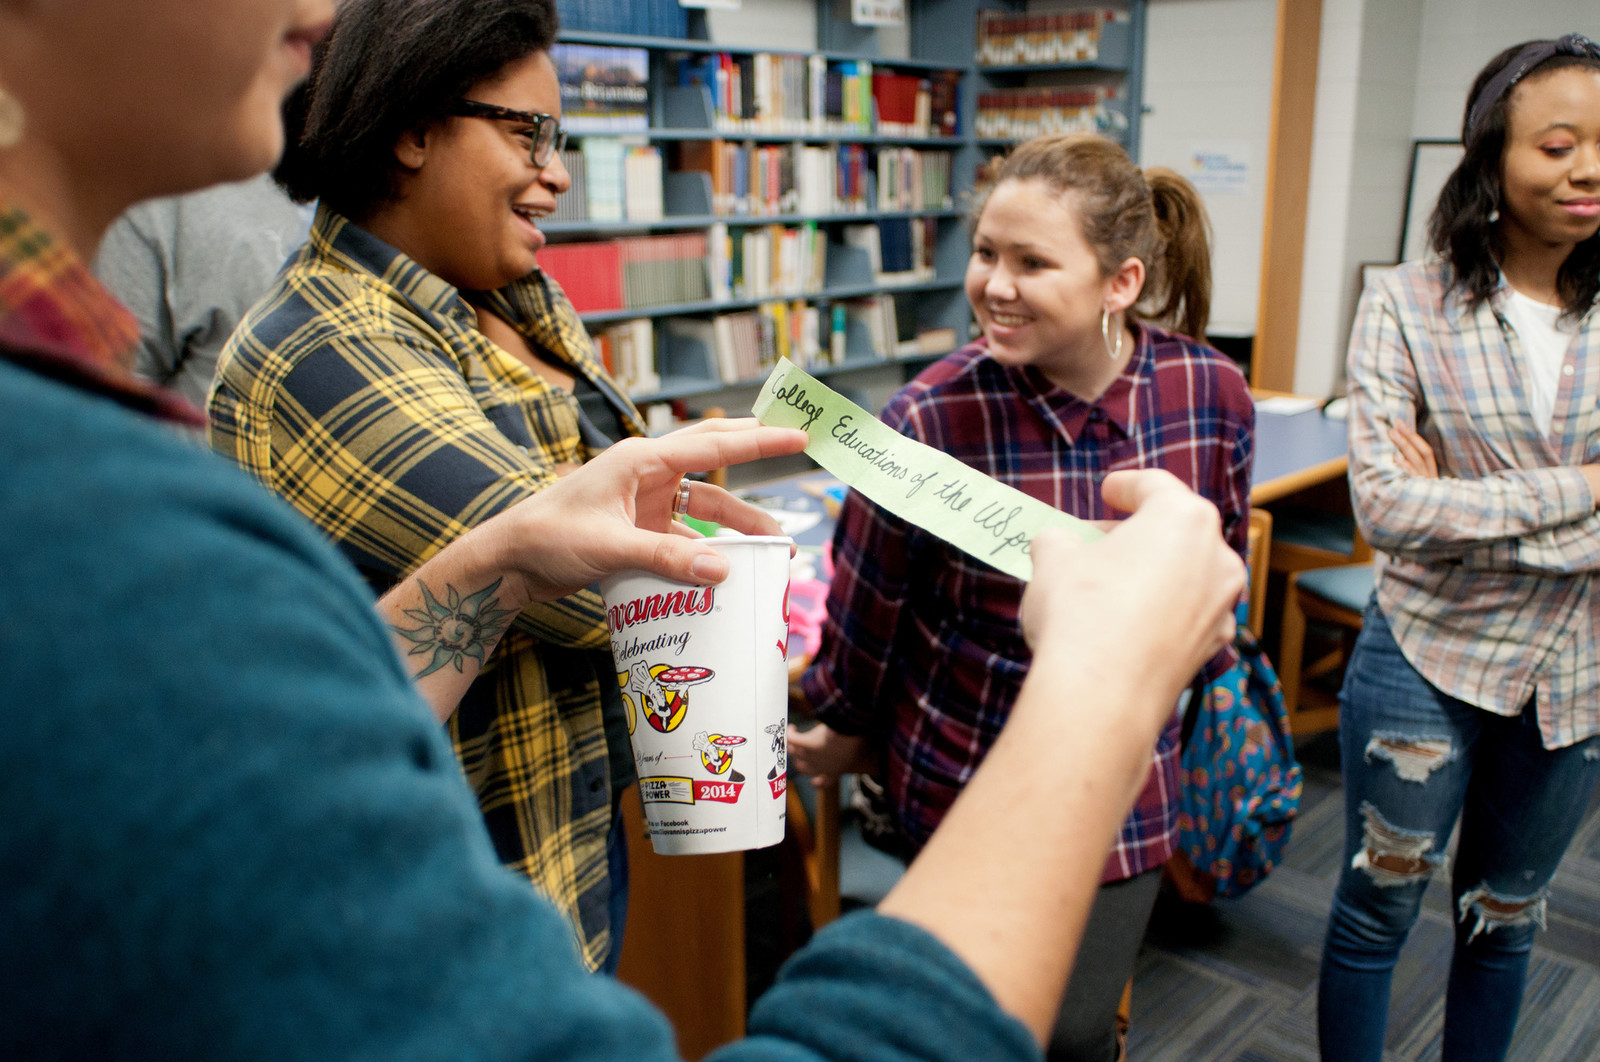 High school students standing in a school library talking together